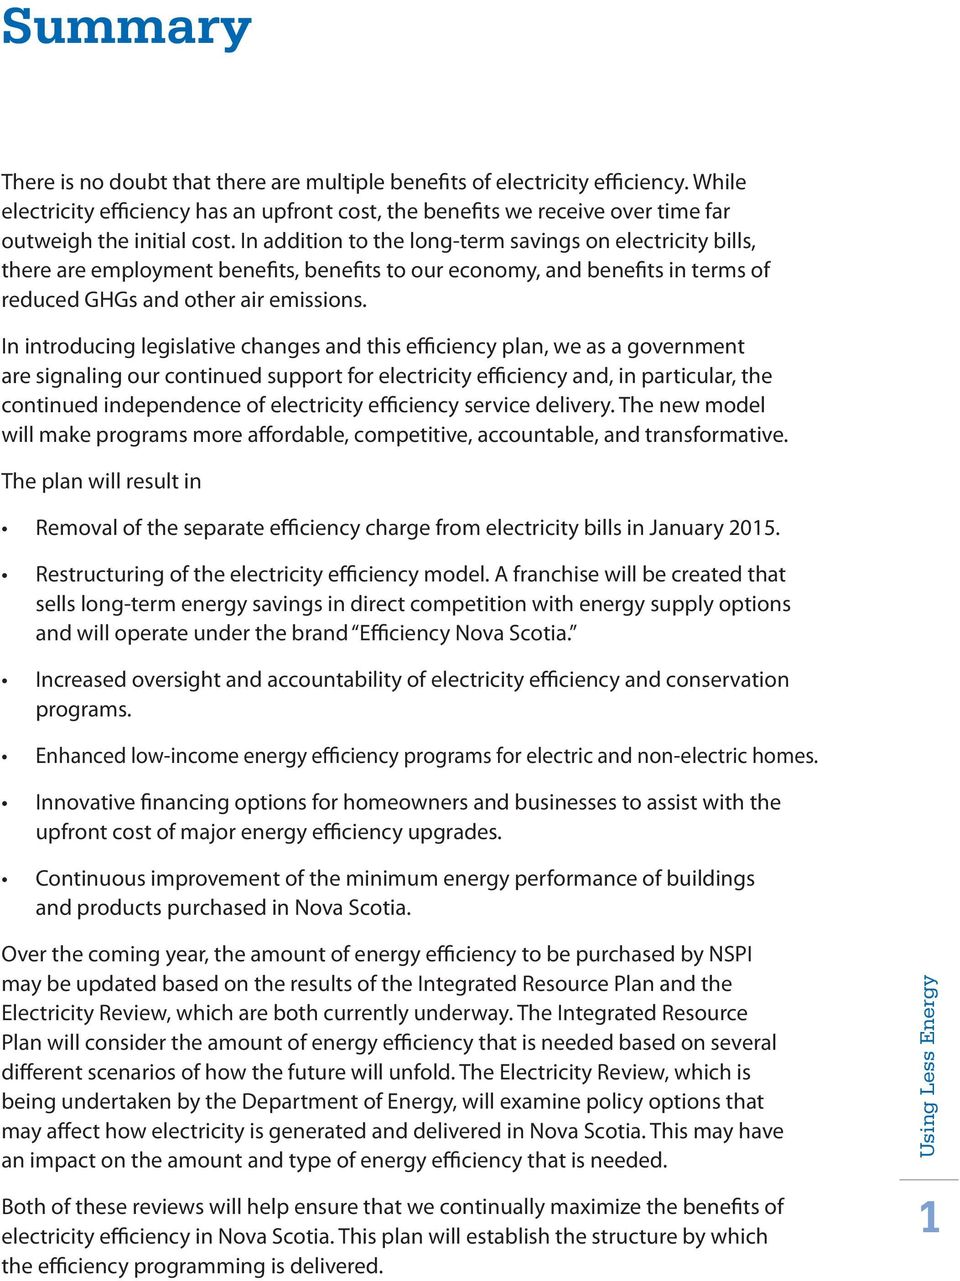 In introducing legislative changes and this efficiency plan, we as a government are signaling our continued support for electricity efficiency and, in particular, the continued independence of